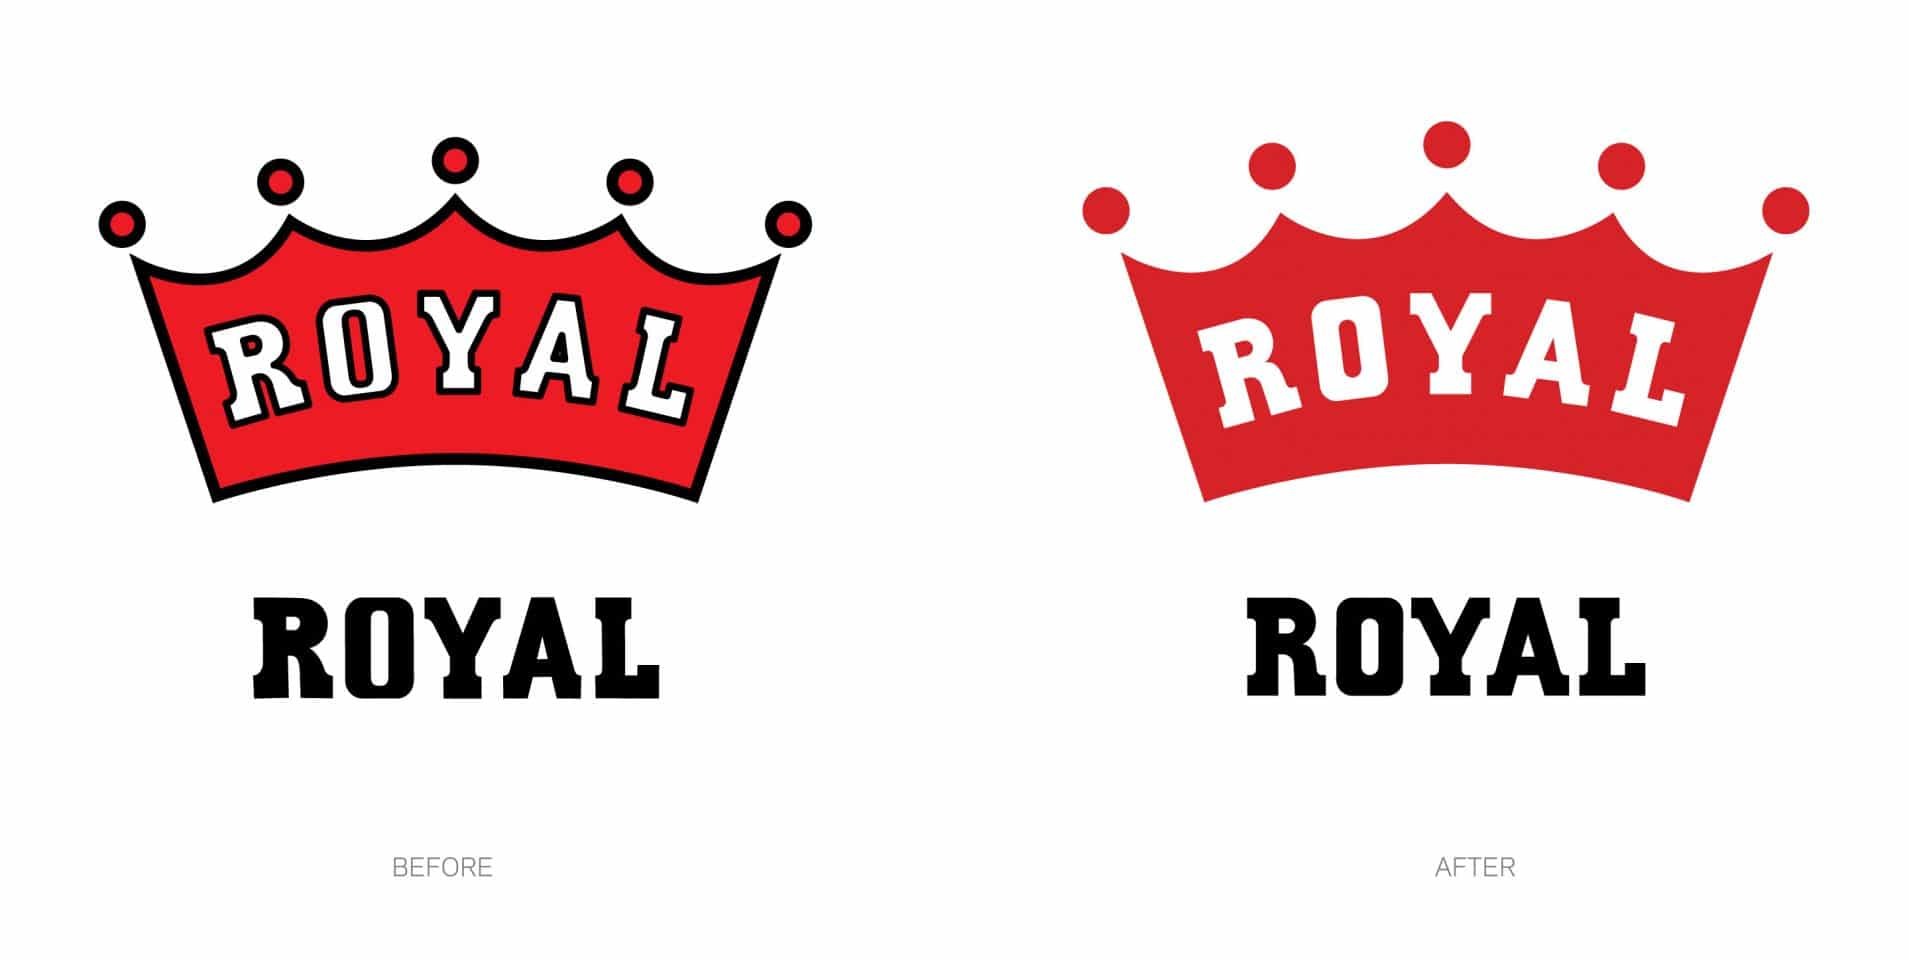 New and older Royal identity